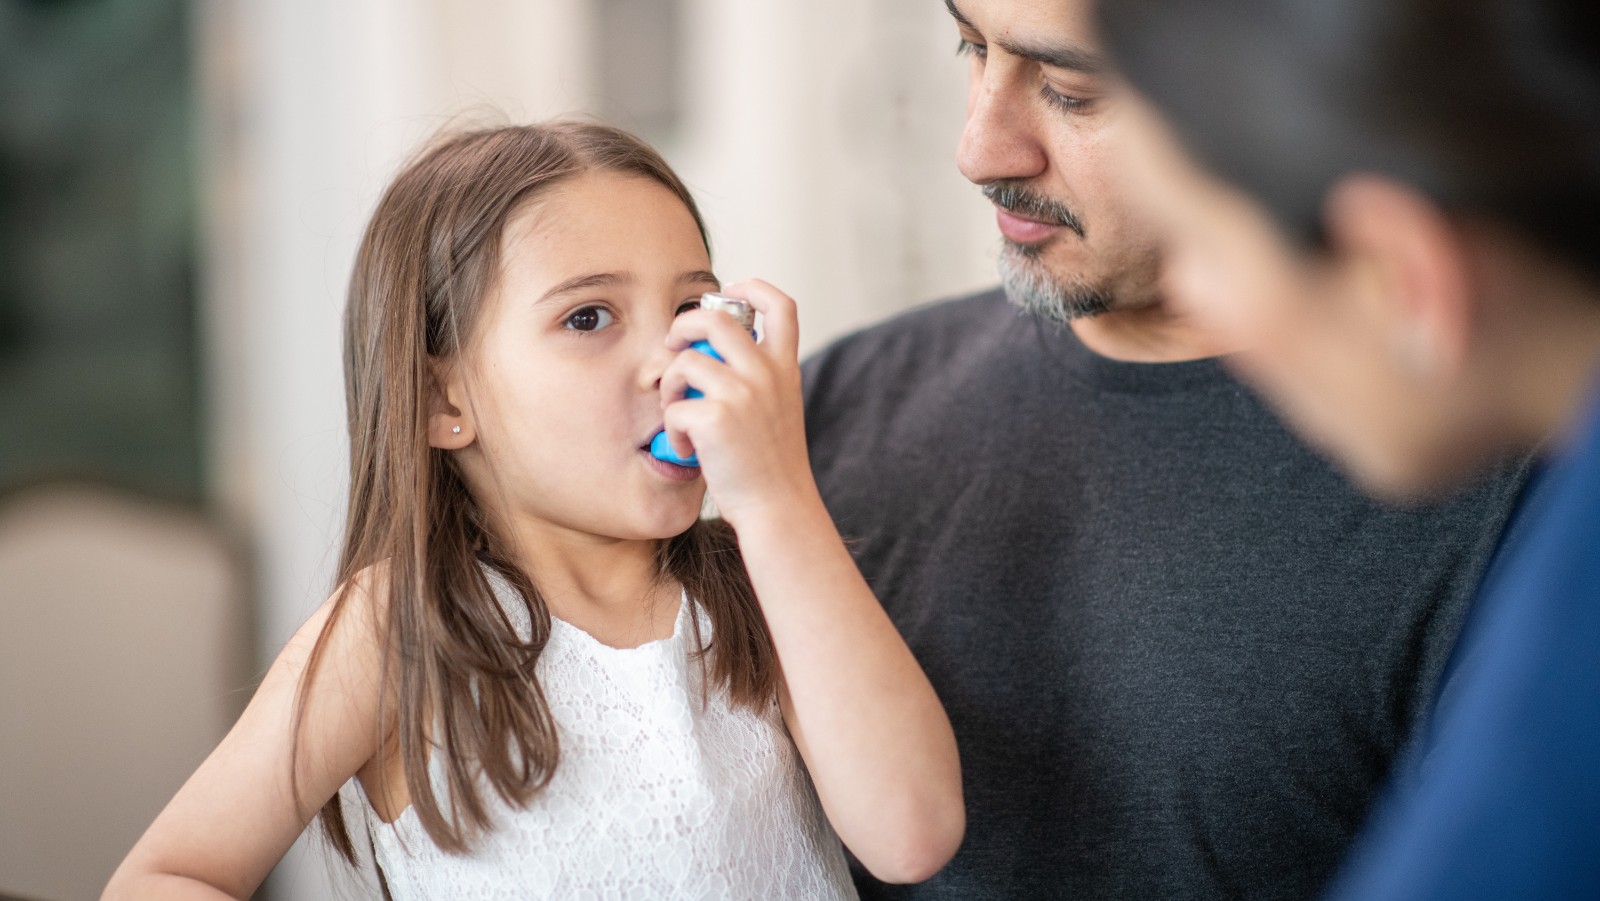 A recent study sheds new light on factors that may make childhood asthma harder to control — information that could benefit both families and health professionals. (Photo: Getty Images)